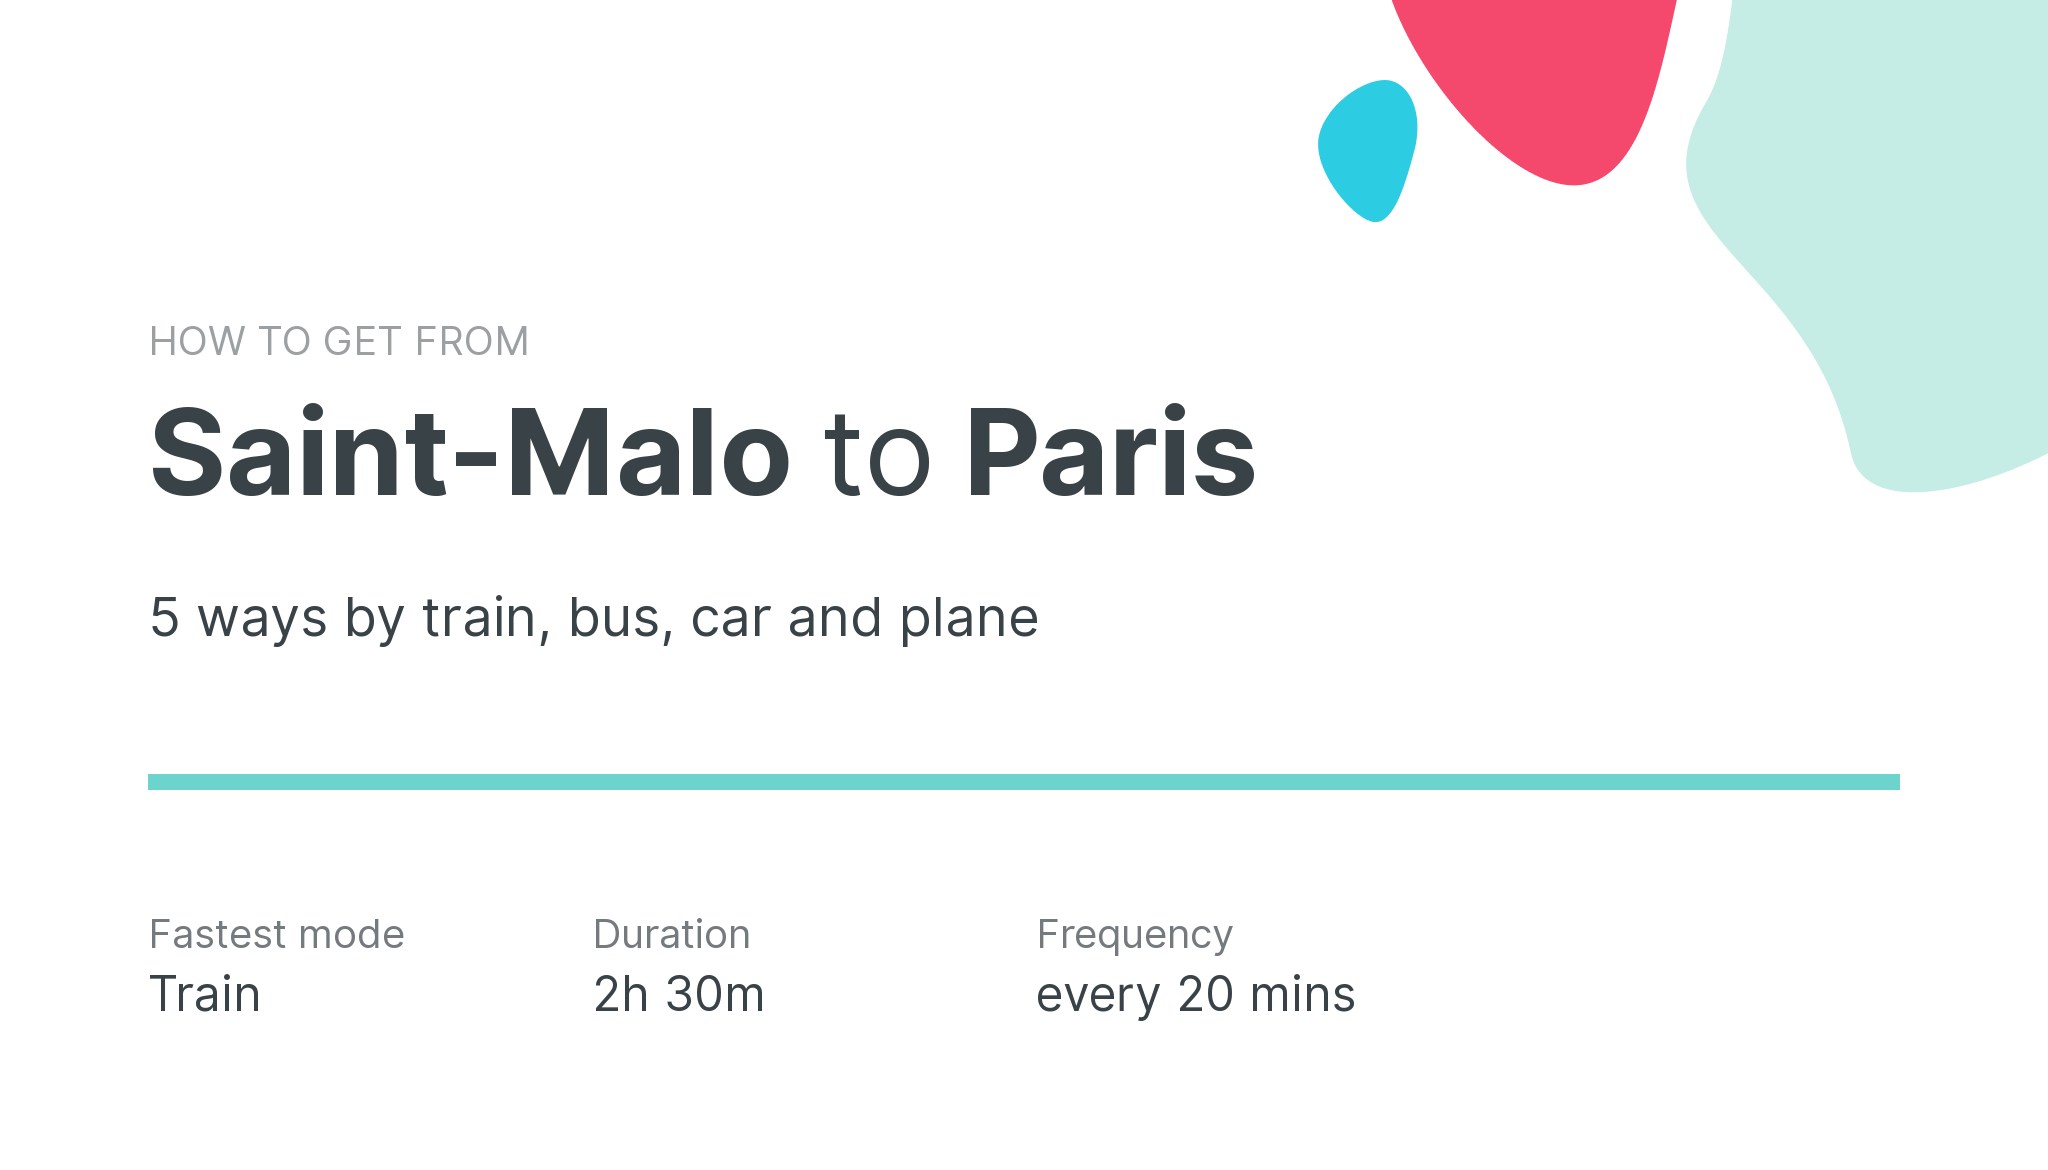 How do I get from Saint-Malo to Paris